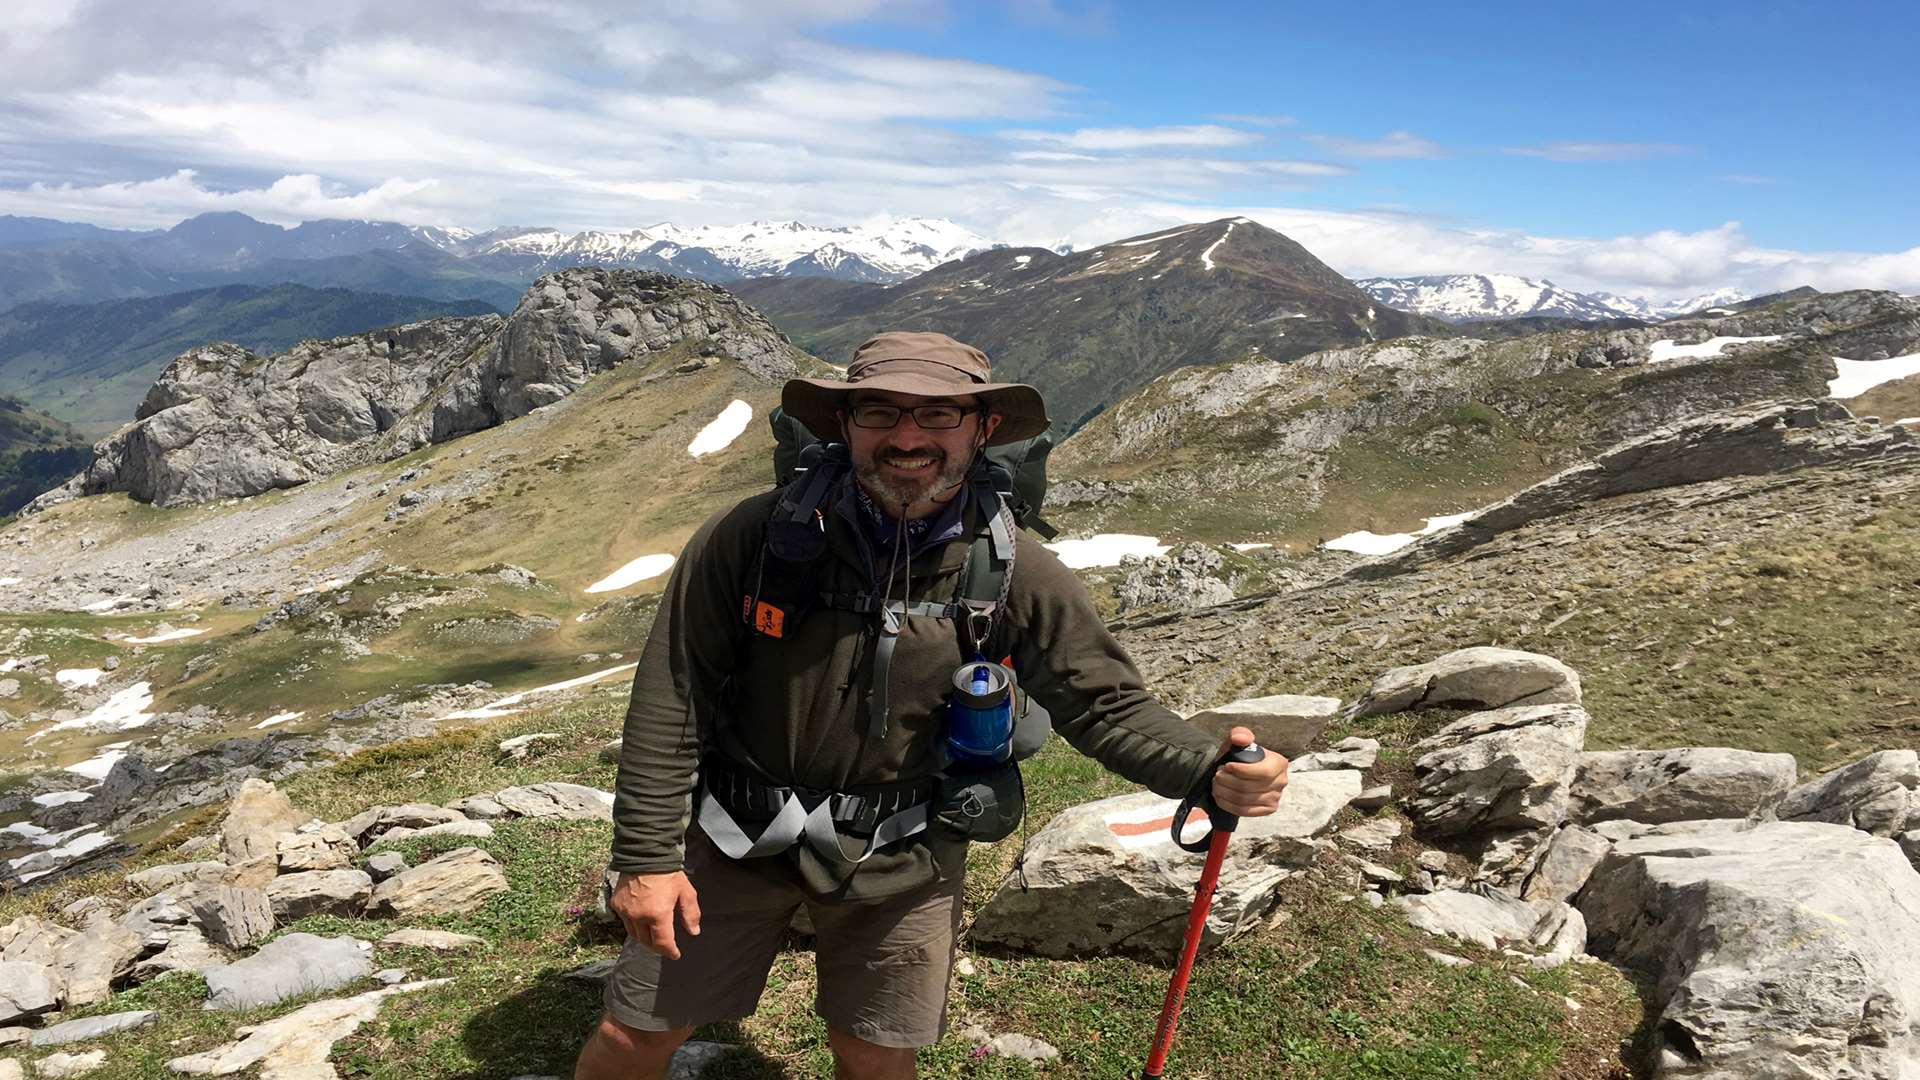 Doctor Chris Markwick on a monumental six week journey across the Pyrenees to raise money for Wild Night Out